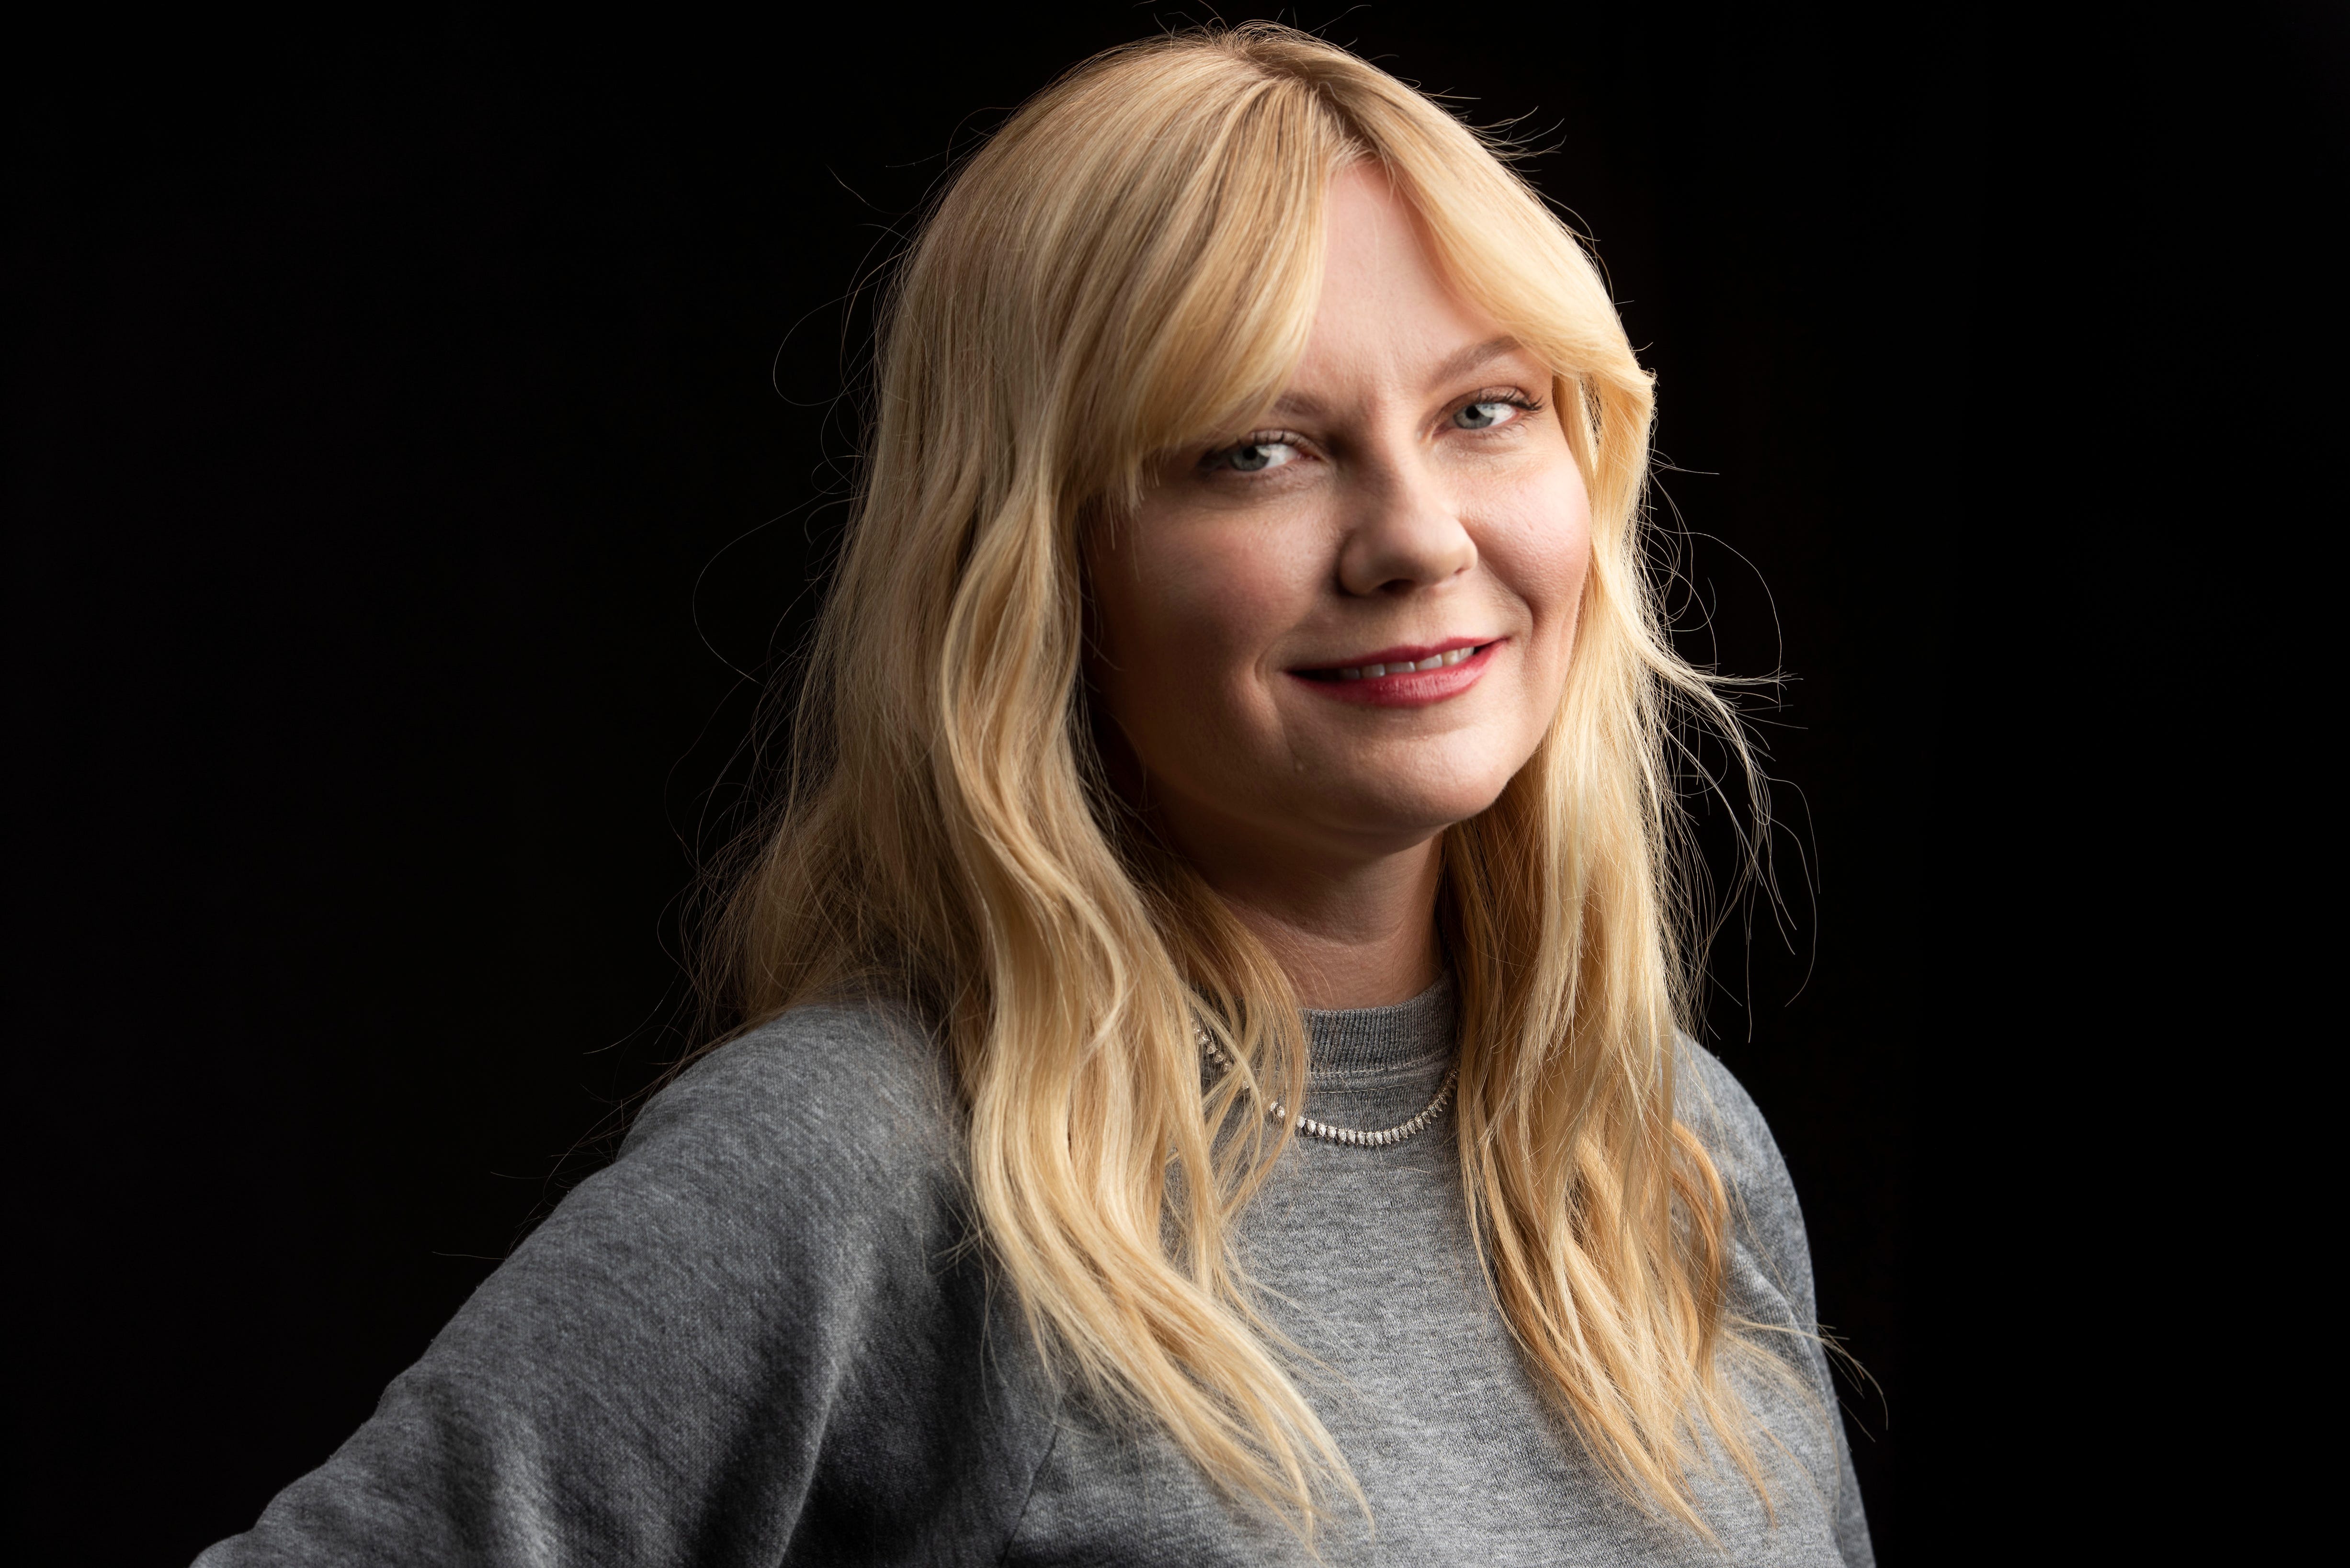 Kirsten Dunst bemoans that she's 'never been recognized in my industry' - USA TODAY